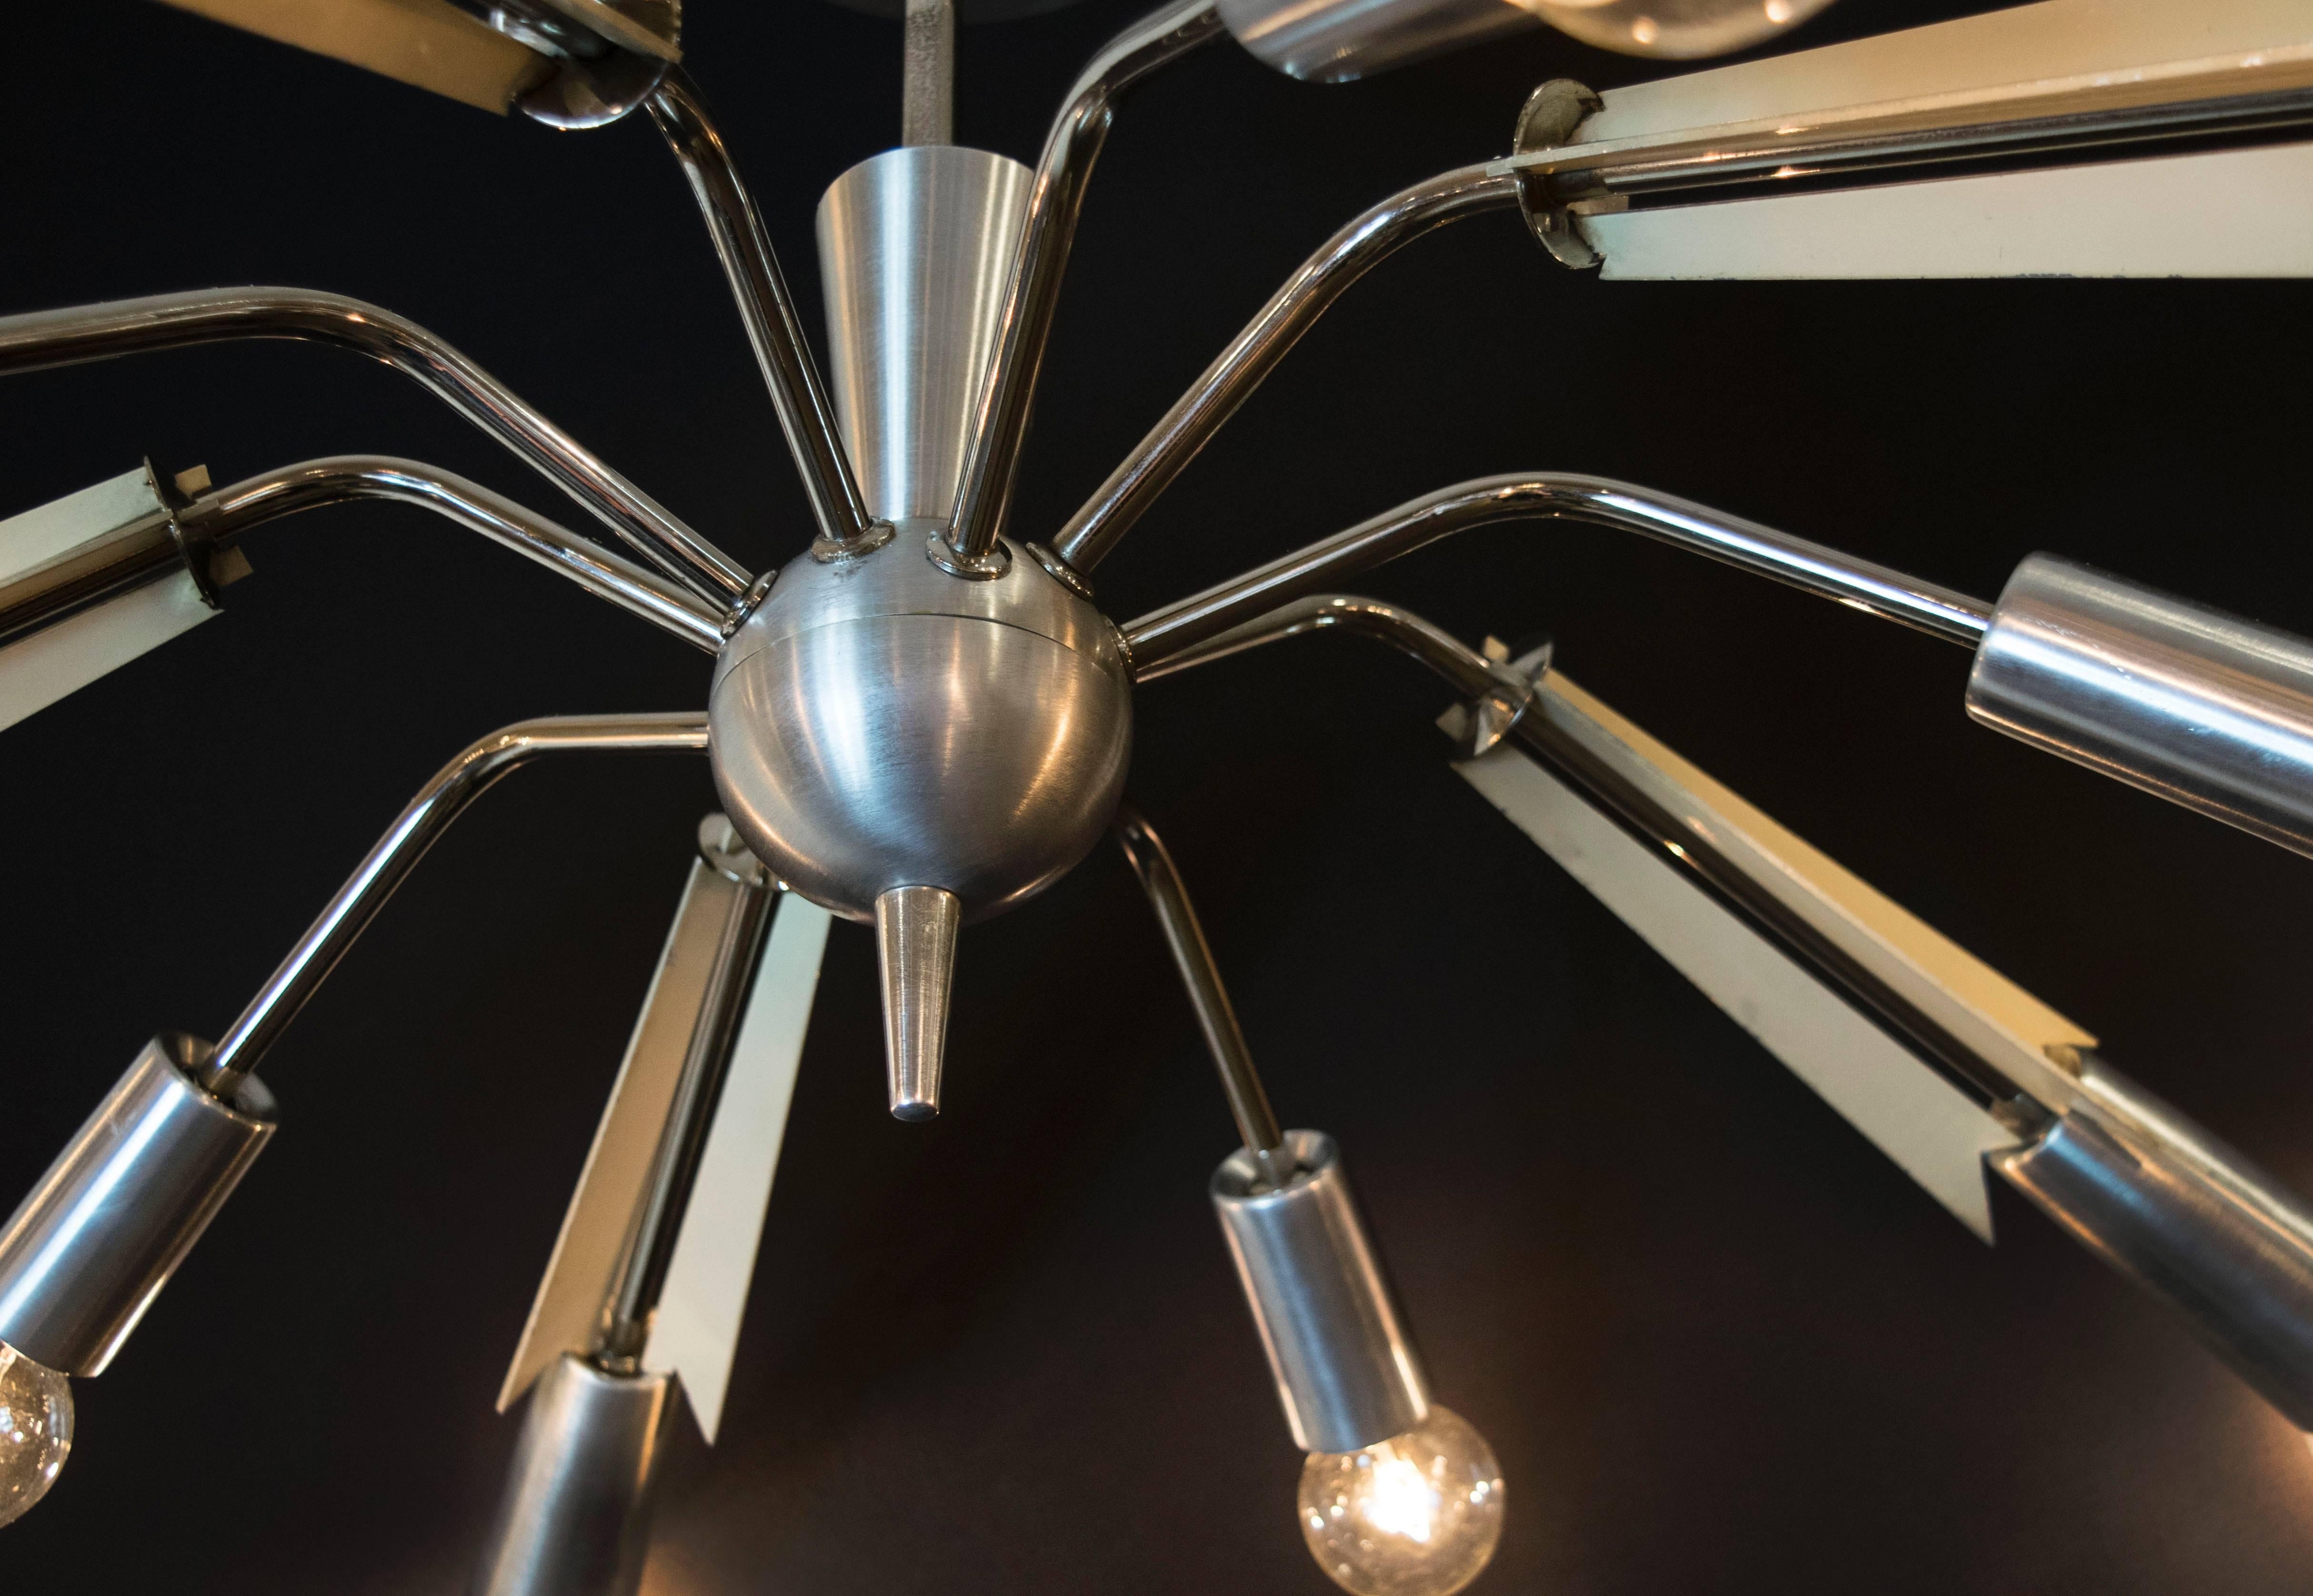 Highly unusual Italian spider chandelier with 10 arms, five longer, five shorter.  The anodized aluminum is in the original color and could possibly be repainted.  Recently rewired.